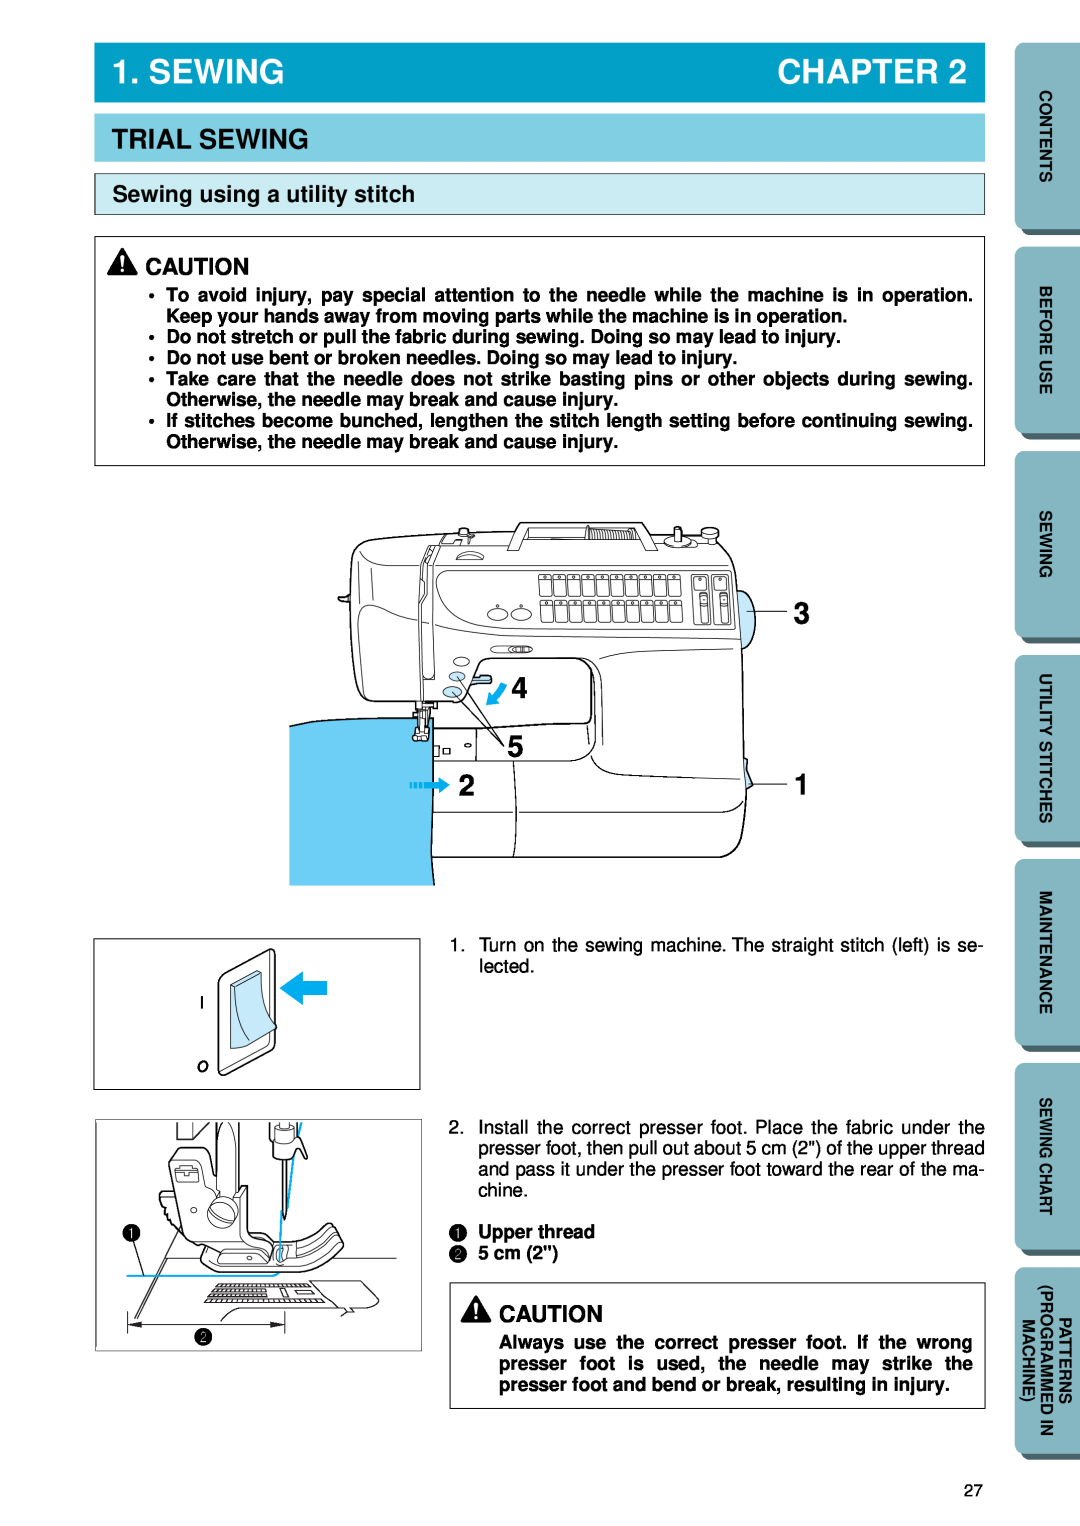 Brother PC-2800 operation manual Trial Sewing, Sewing using a utility stitch, Chapter, Upper thread 2 5 cm 